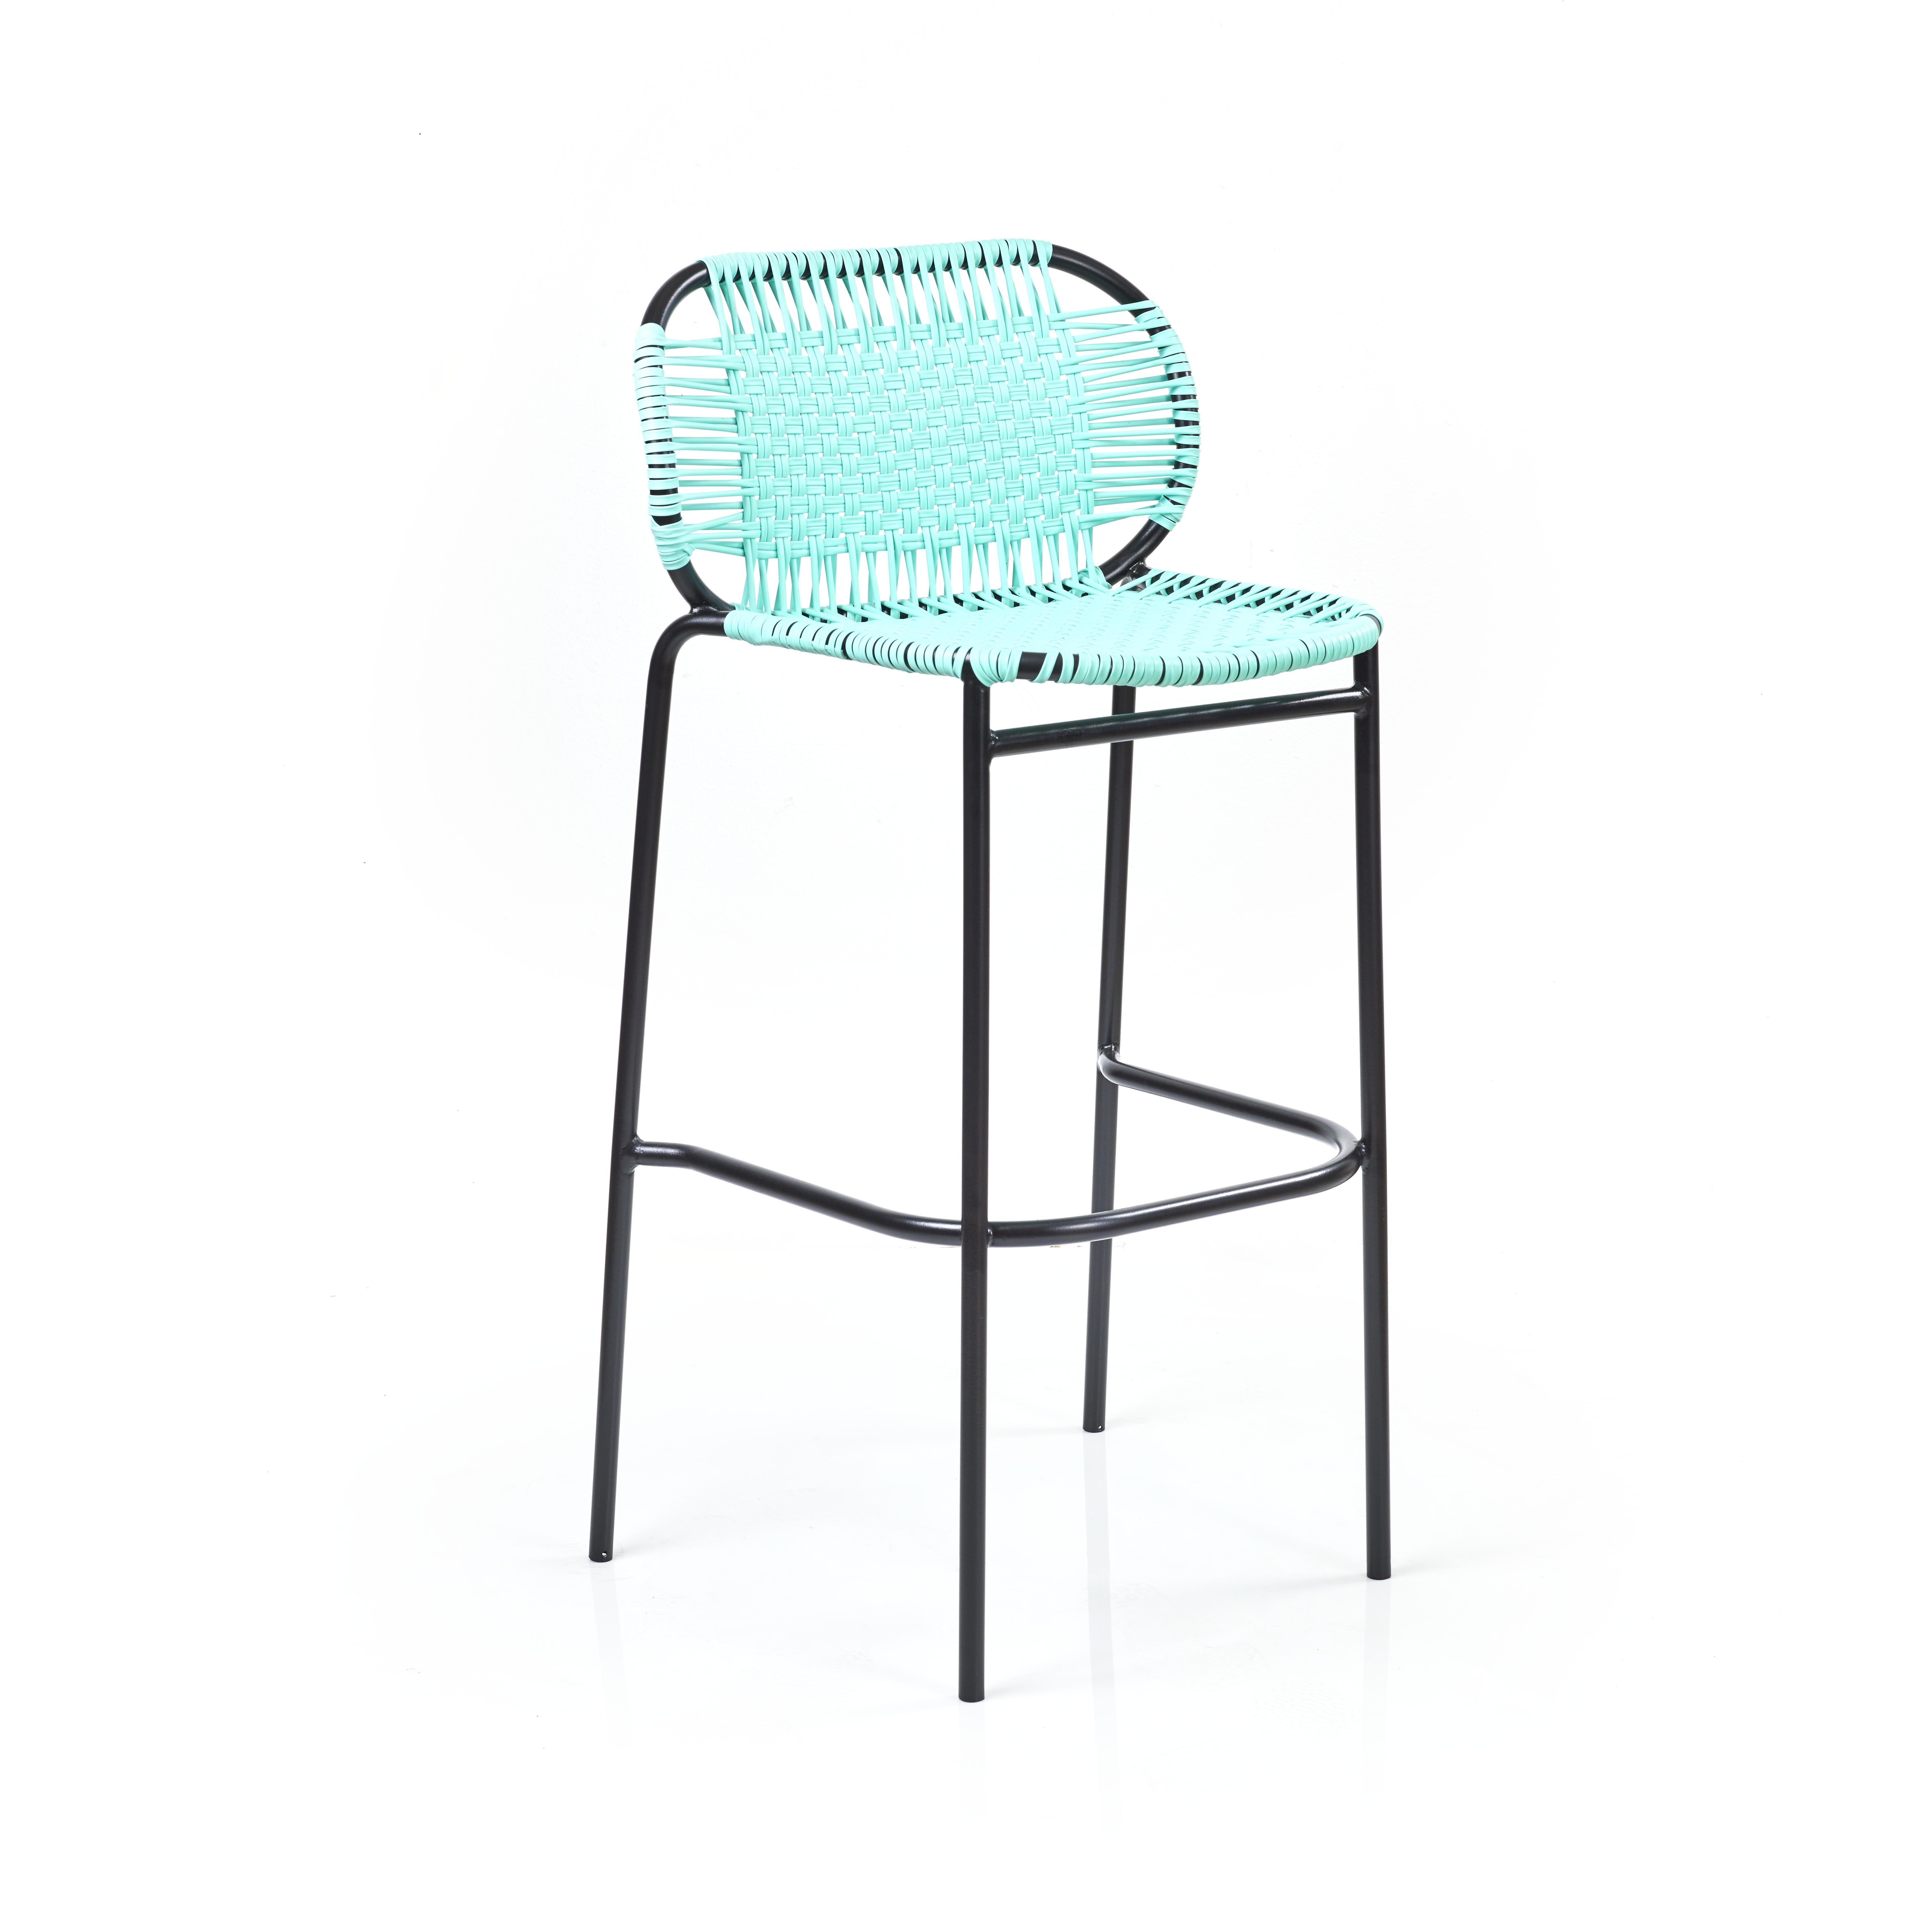 Set of 4 mint cielo bar stool by Sebastian Herkner
Materials: Galvanized and powder-coated tubular steel. PVC strings are made from recycled plastic.
Technique: Made from recycled plastic and weaved by local craftspeople in Cartagena, Colombia.